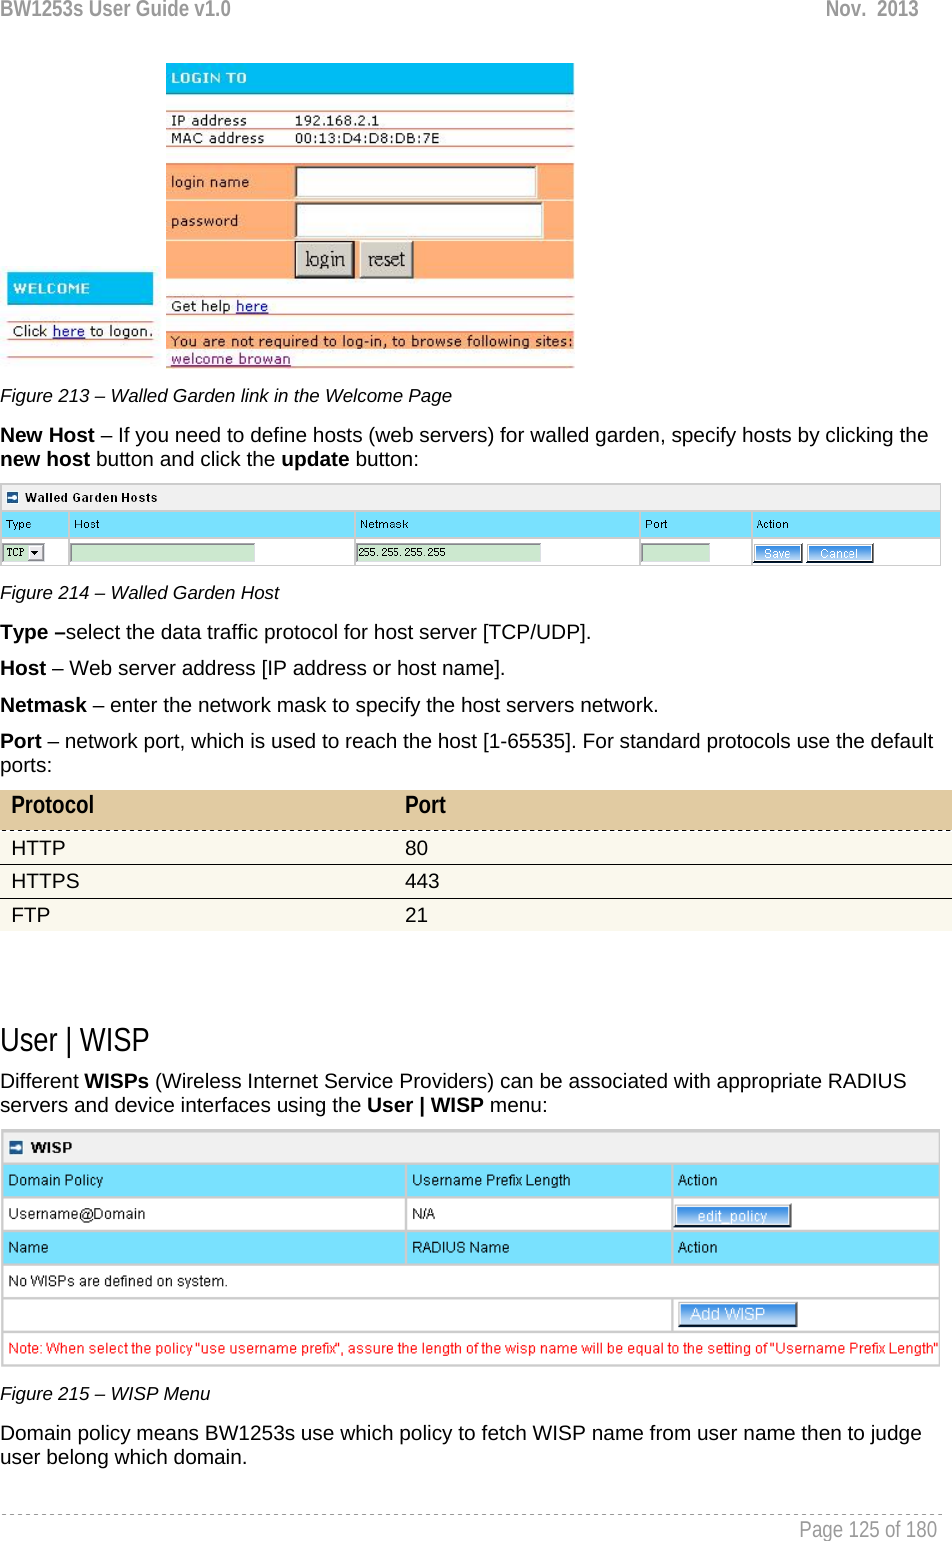 BW1253s User Guide v1.0  Nov.  2013     Page 125 of 180    Figure 213 – Walled Garden link in the Welcome Page New Host – If you need to define hosts (web servers) for walled garden, specify hosts by clicking the new host button and click the update button:  Figure 214 – Walled Garden Host Type –select the data traffic protocol for host server [TCP/UDP]. Host – Web server address [IP address or host name]. Netmask – enter the network mask to specify the host servers network. Port – network port, which is used to reach the host [1-65535]. For standard protocols use the default ports: Protocol  Port HTTP  80 HTTPS  443 FTP  21   User | WISP Different WISPs (Wireless Internet Service Providers) can be associated with appropriate RADIUS servers and device interfaces using the User | WISP menu:  Figure 215 – WISP Menu Domain policy means BW1253s use which policy to fetch WISP name from user name then to judge user belong which domain. 